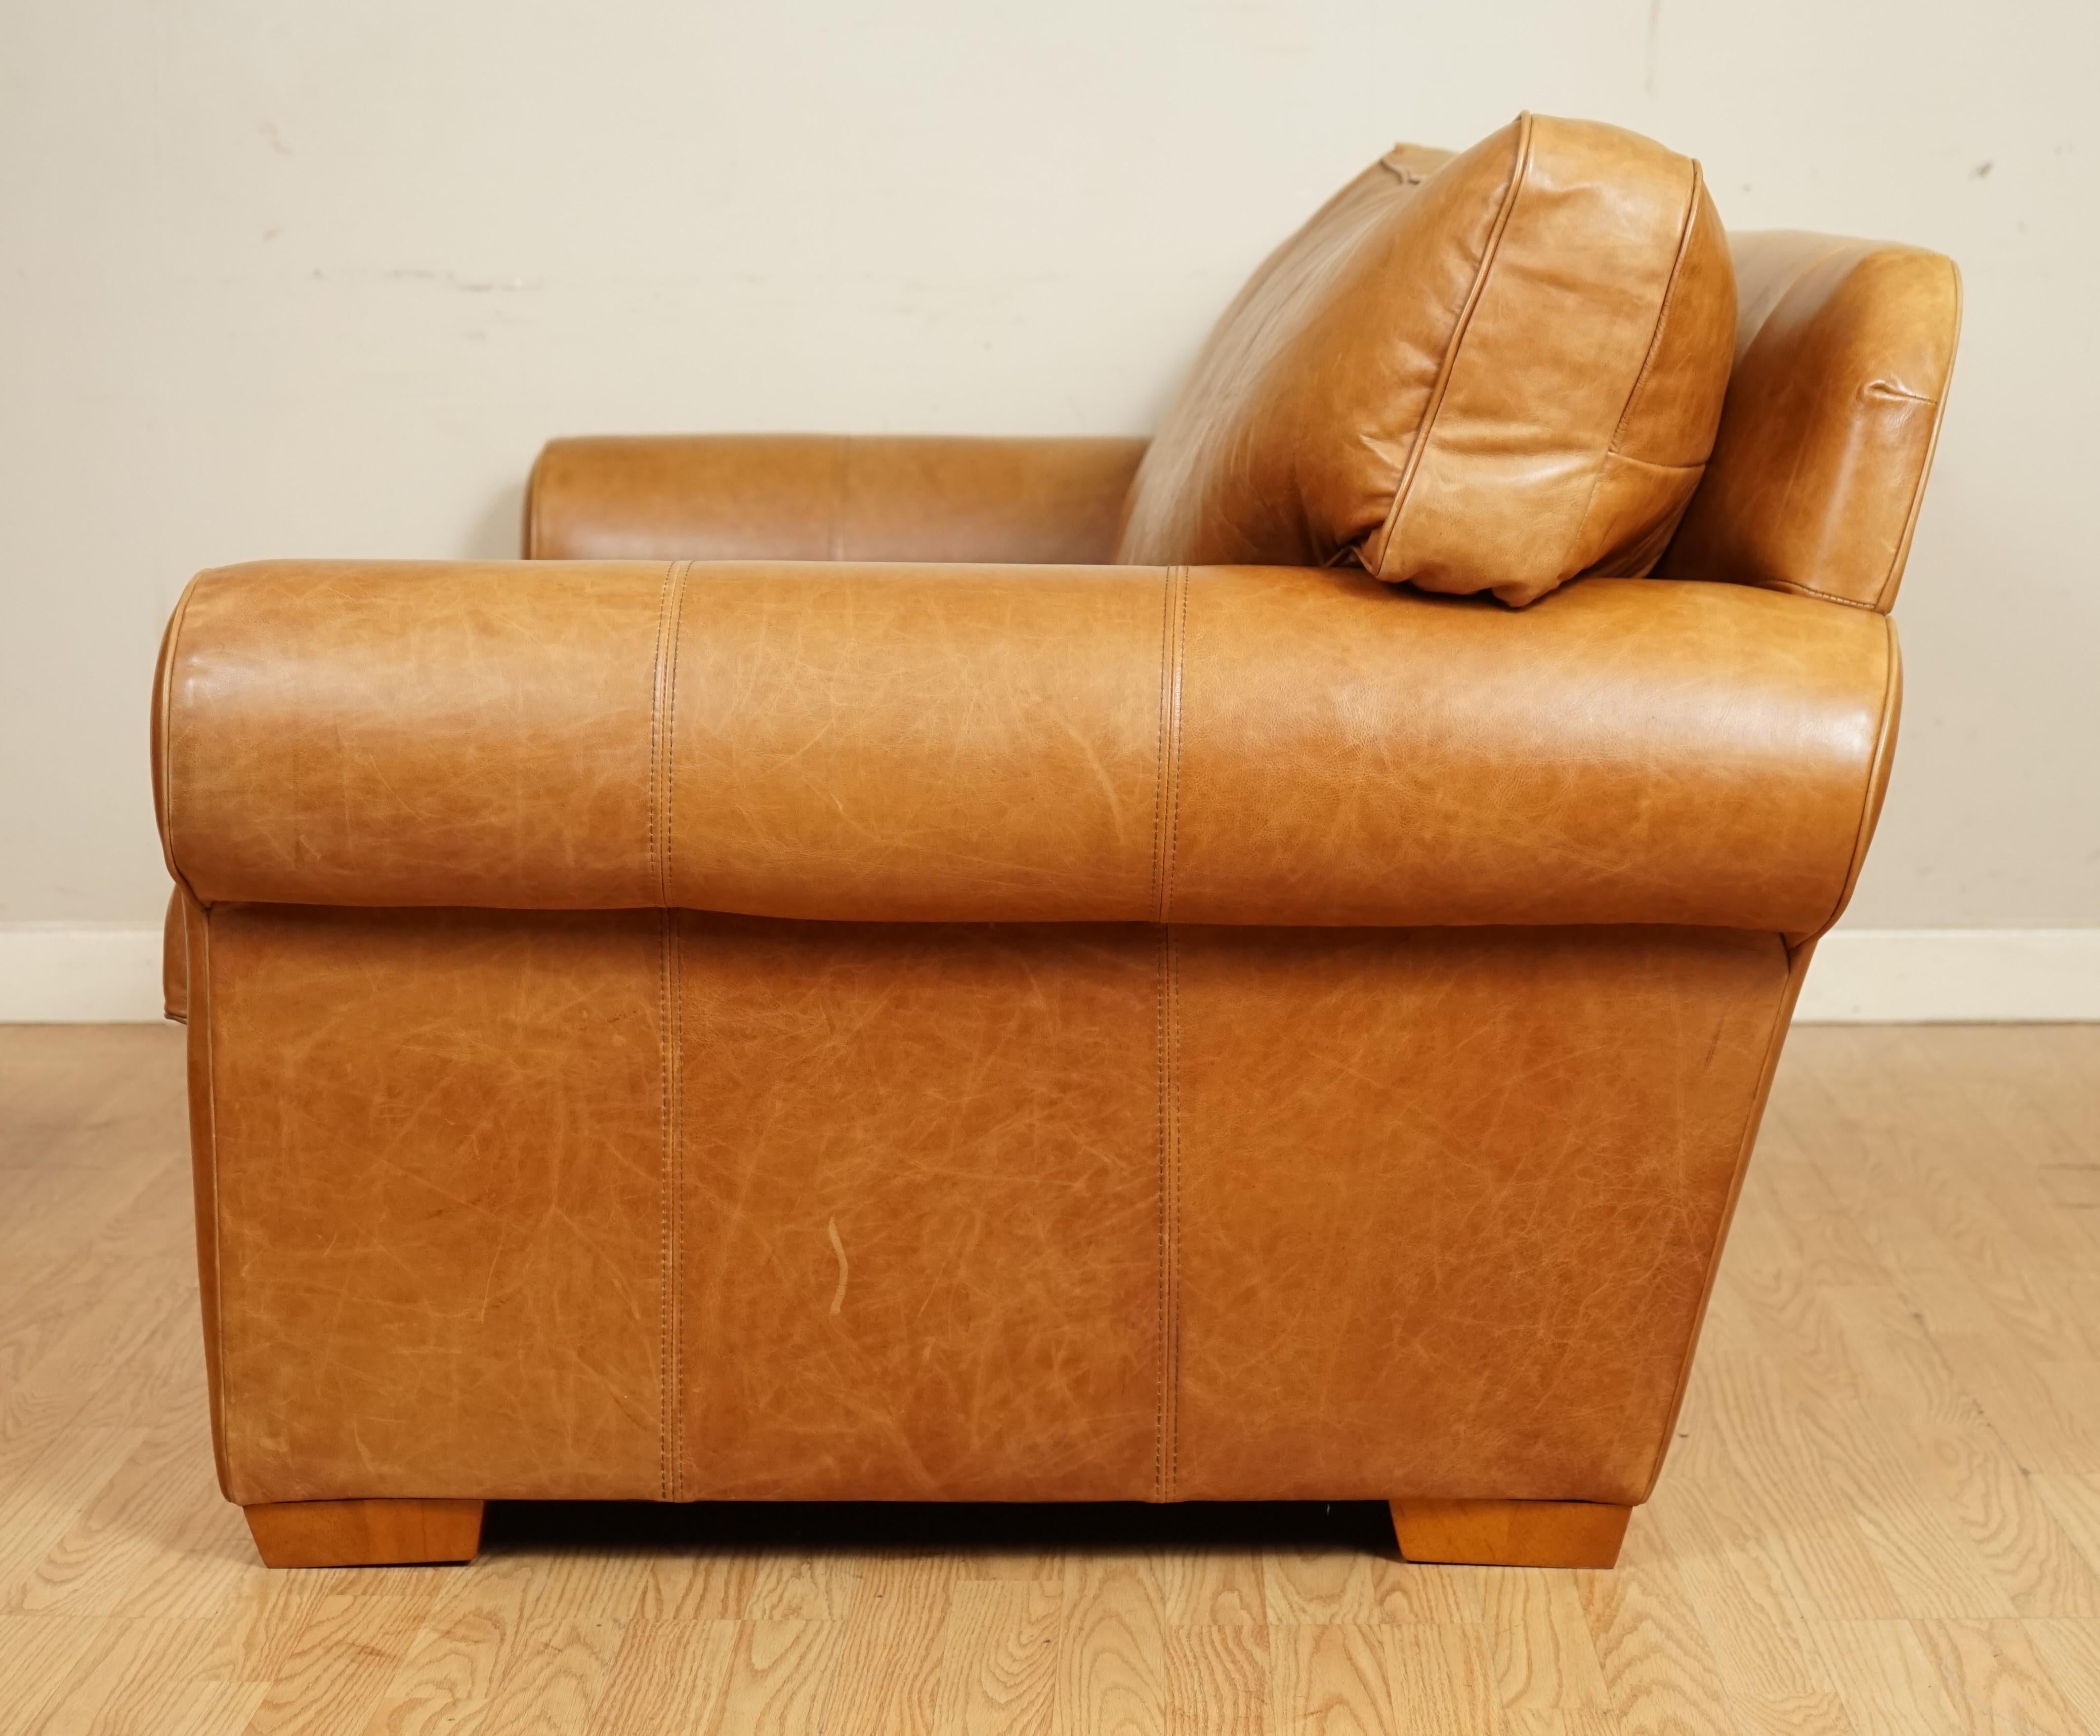 Sumptuous Multiyork Buttery Soft Tan Leather Two Three Seater Sofa 2